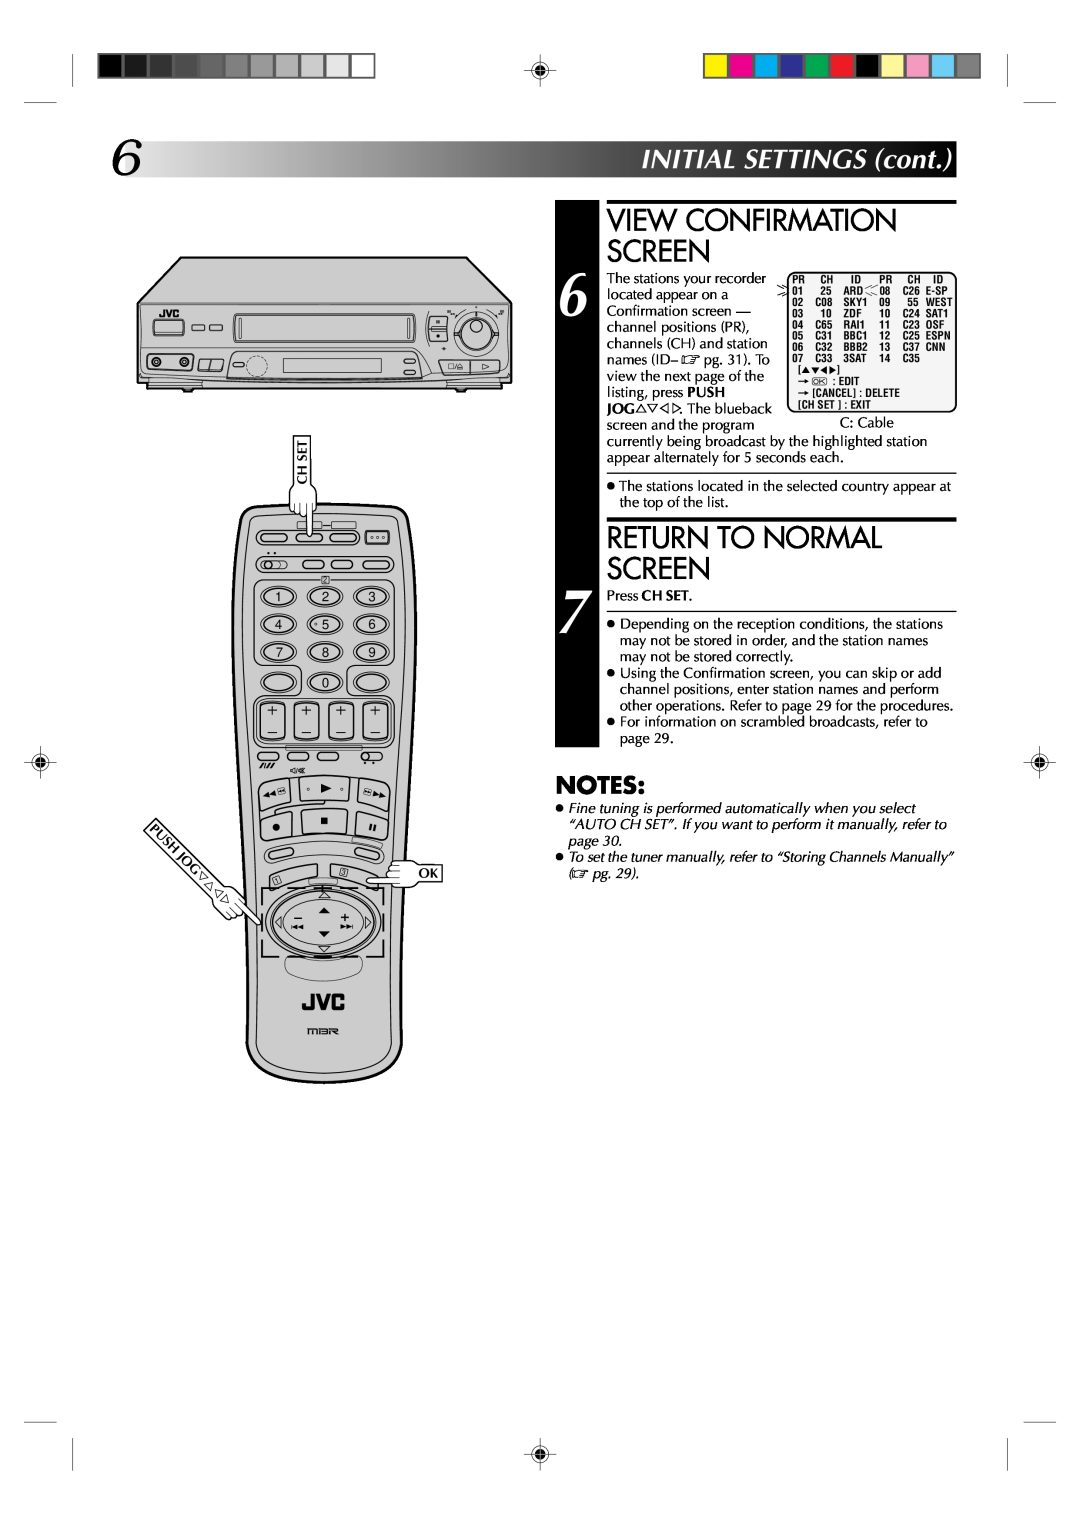 JVC HR-J438E, HR-J238E specifications View Confirmation Screen, Return To Normal Screen, INITIALSETTINGScont 